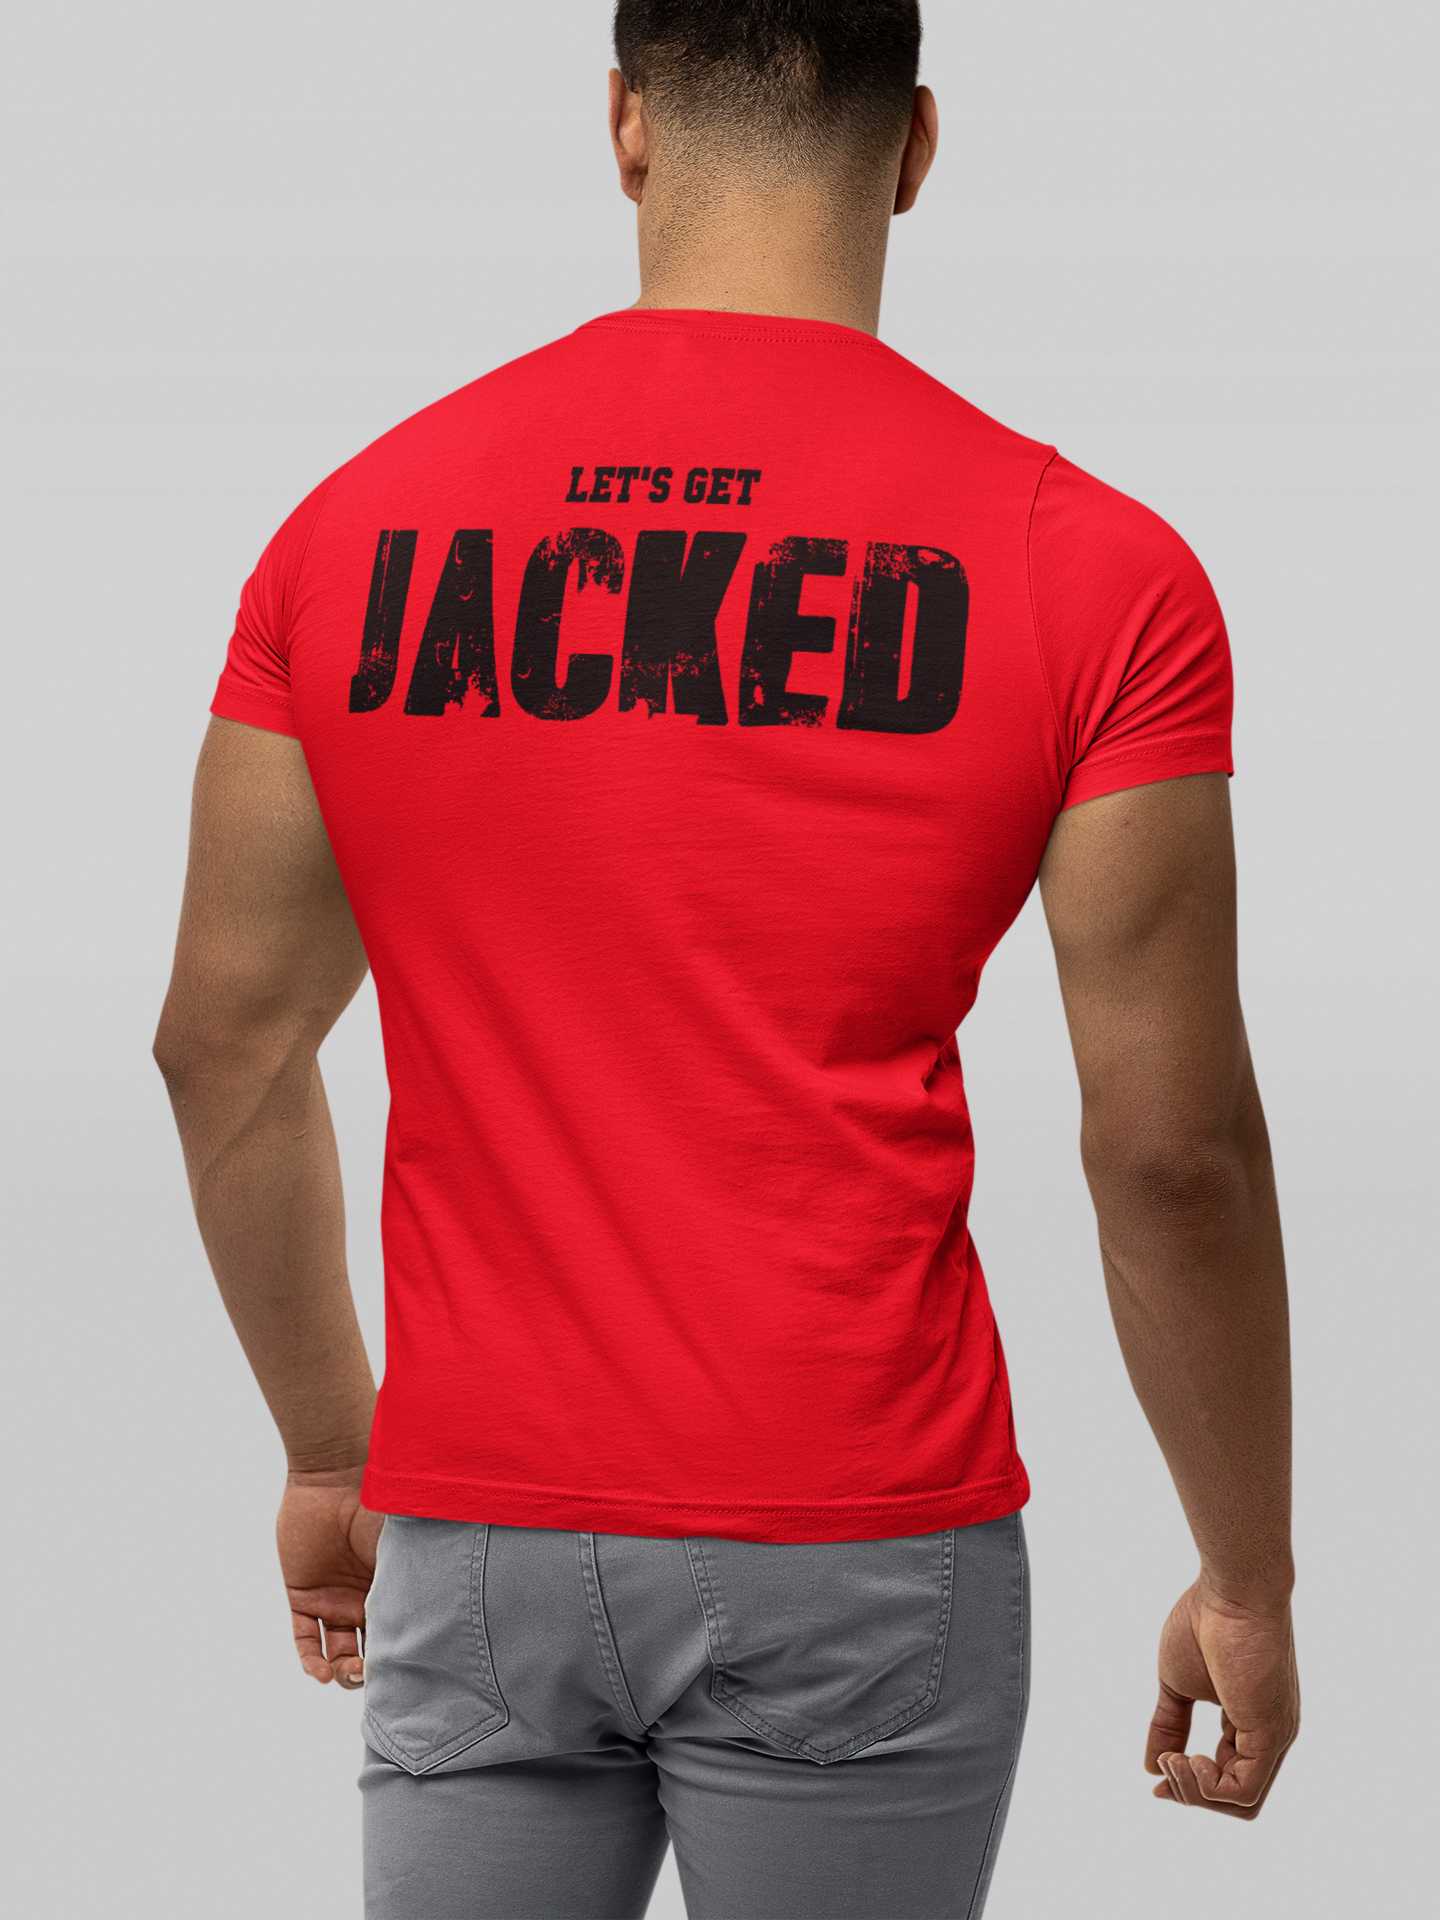 Let's Get Jacked - Gym TShirt Strong Soul Shirts & Tops